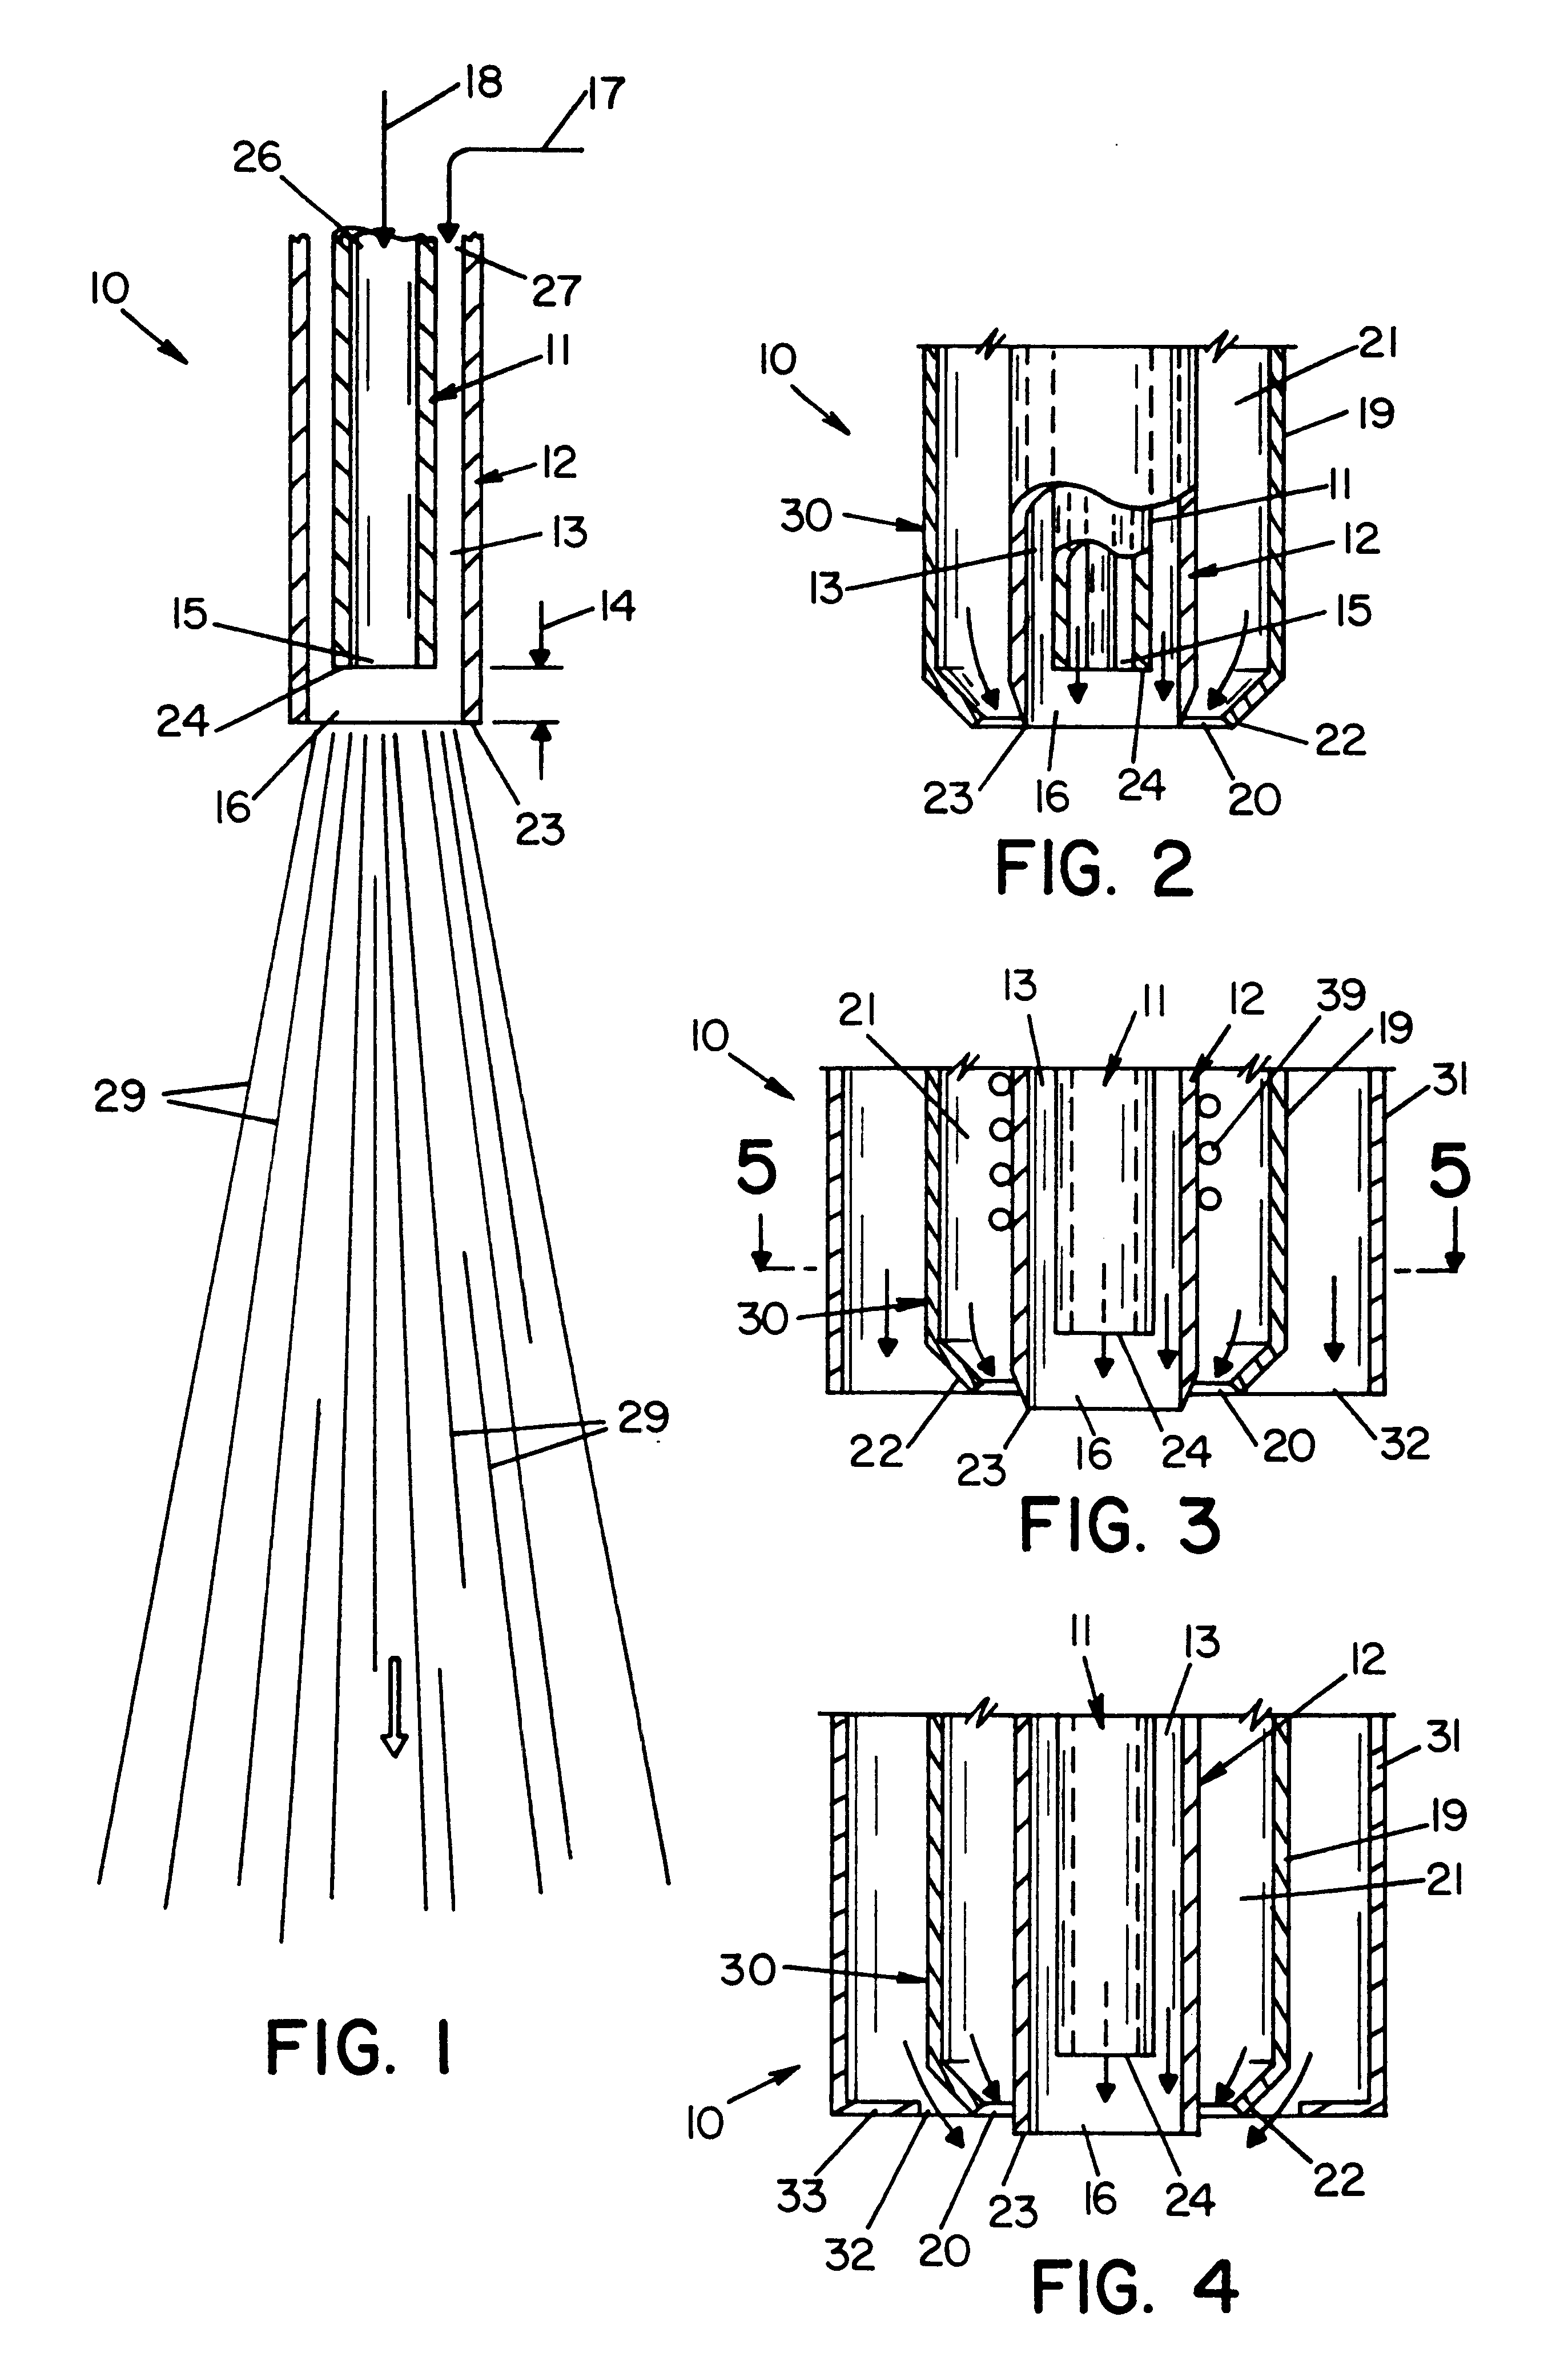 Process and apparatus for the production of nanofibers